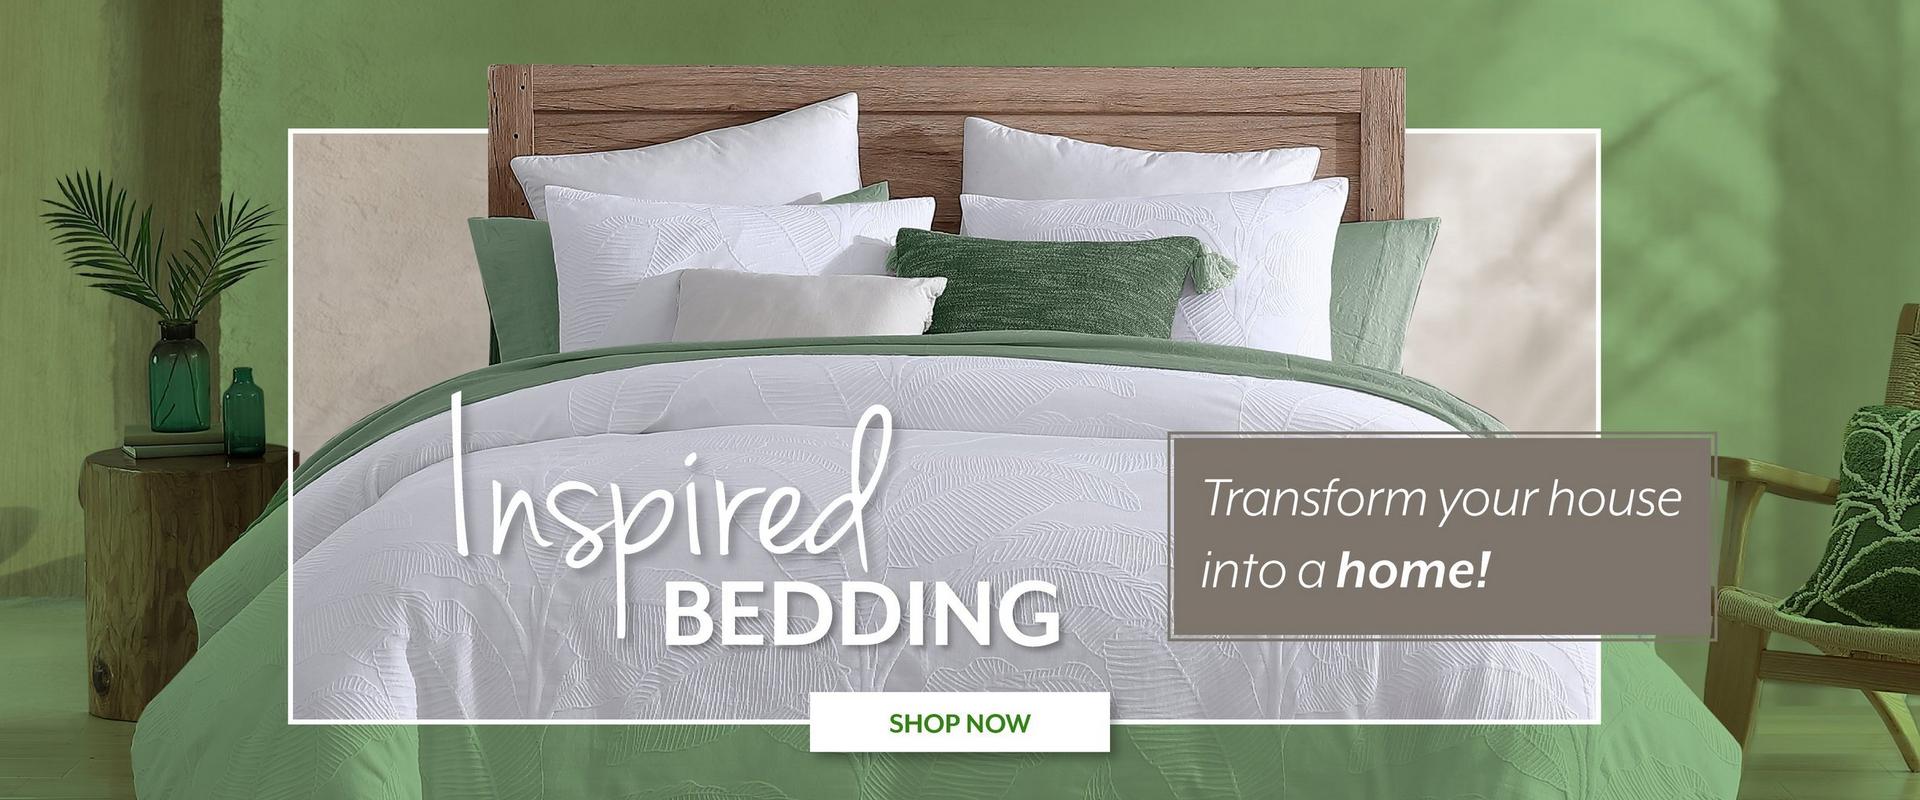 Inspired Bedding - shop the latest trends in bedding at HomeCentric.com!